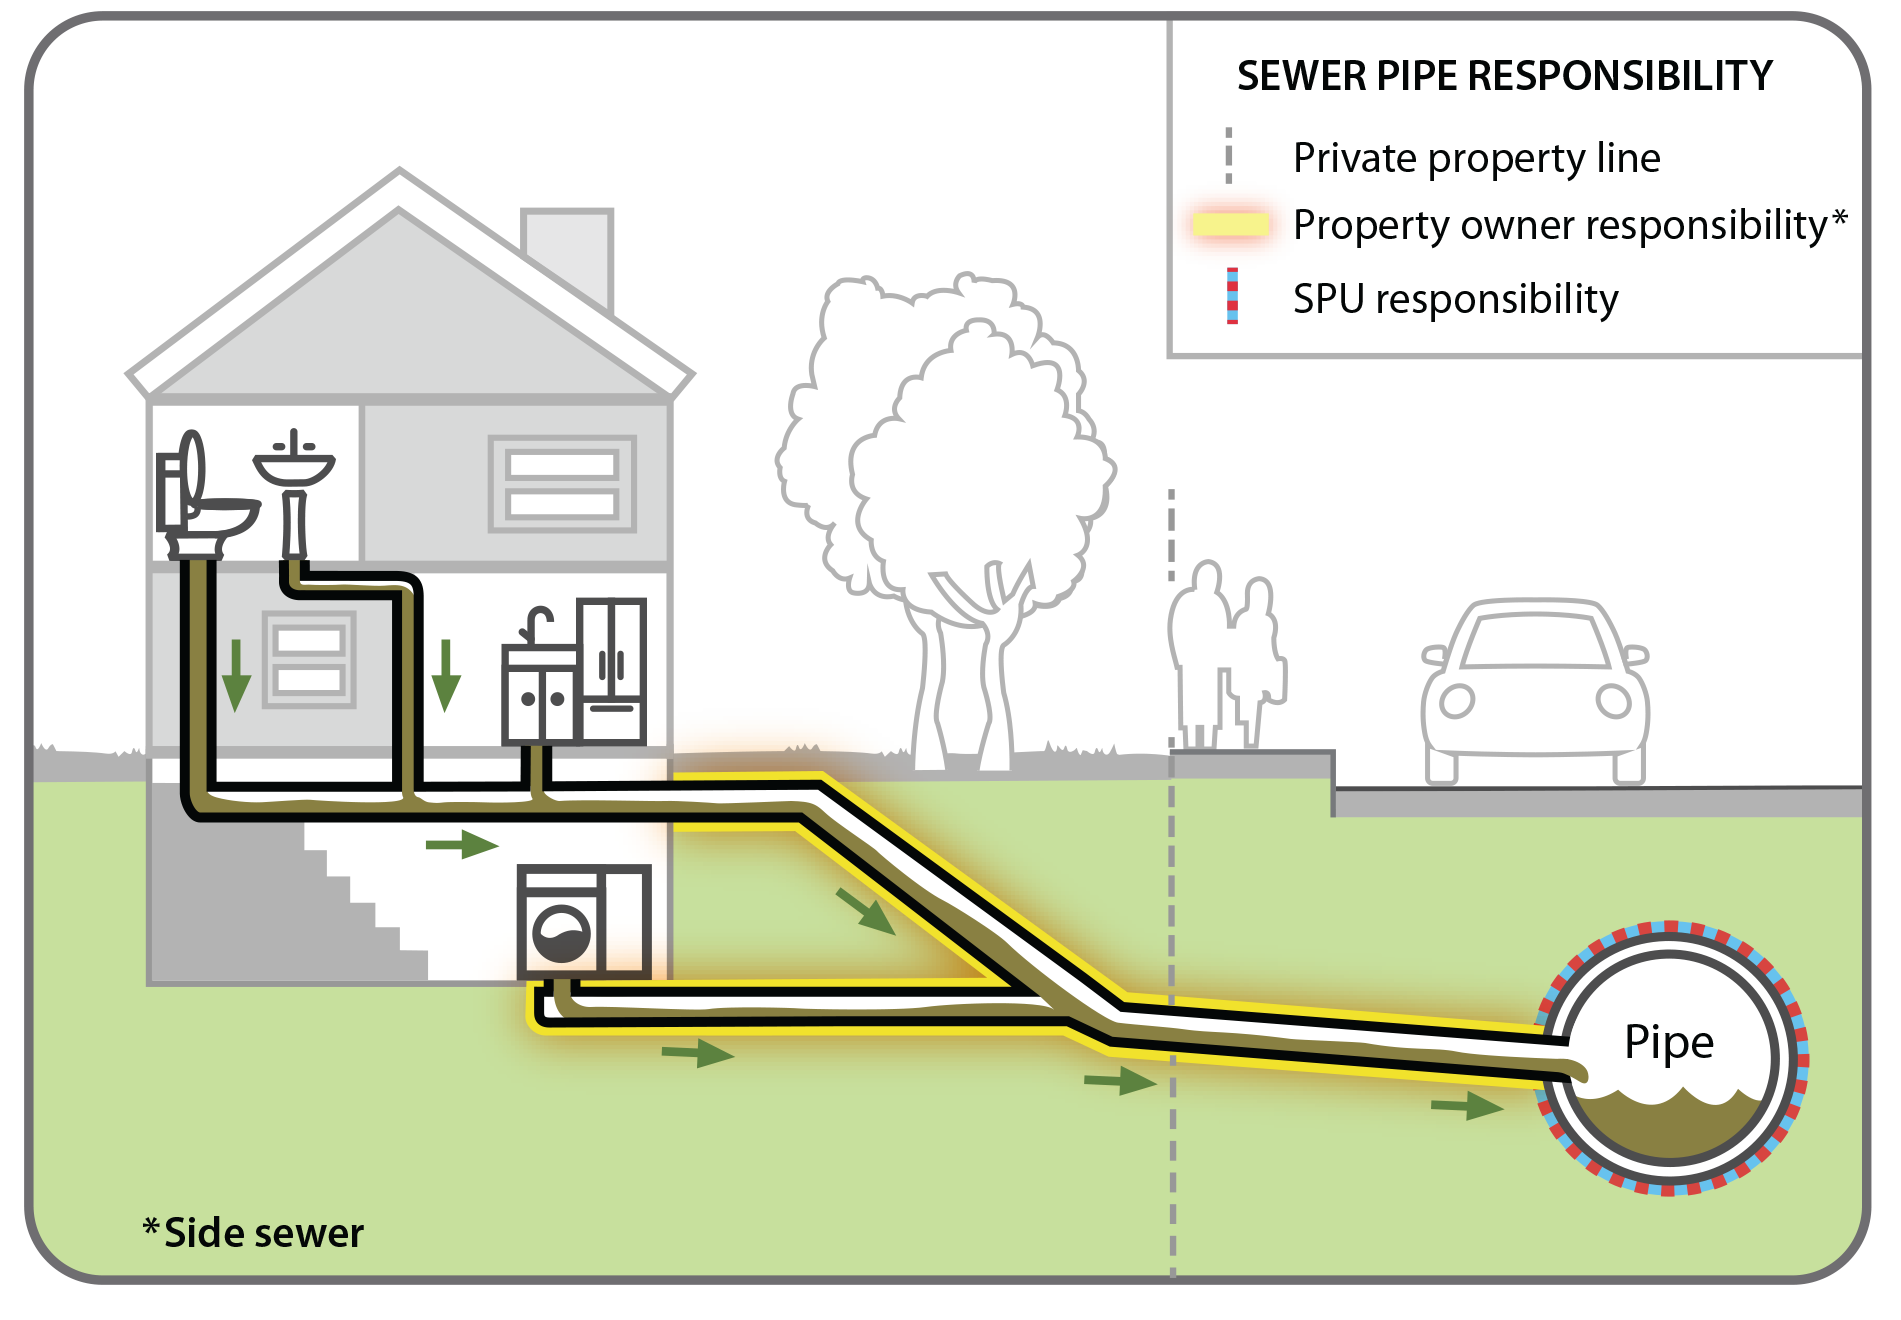 Rendering shows single family home sewer line responsibility, which extends to the sewer mainline.